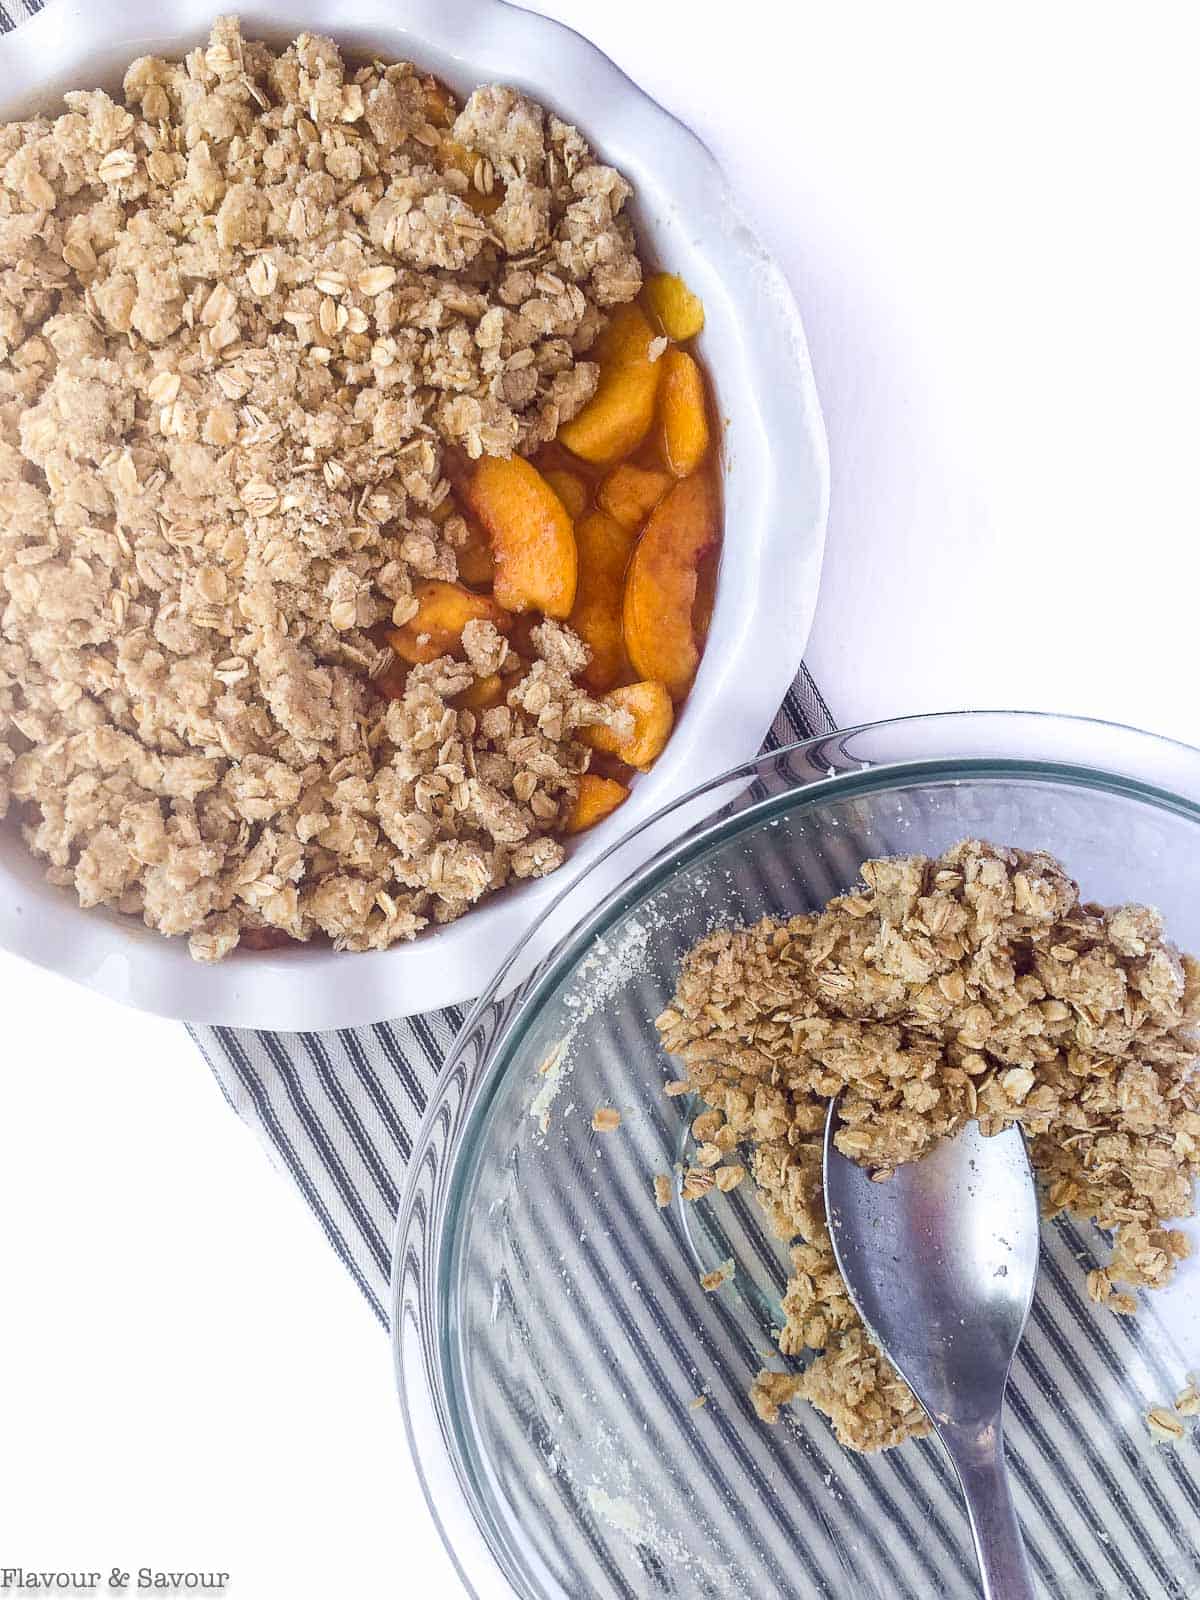 Adding topping to Peach Crisp.